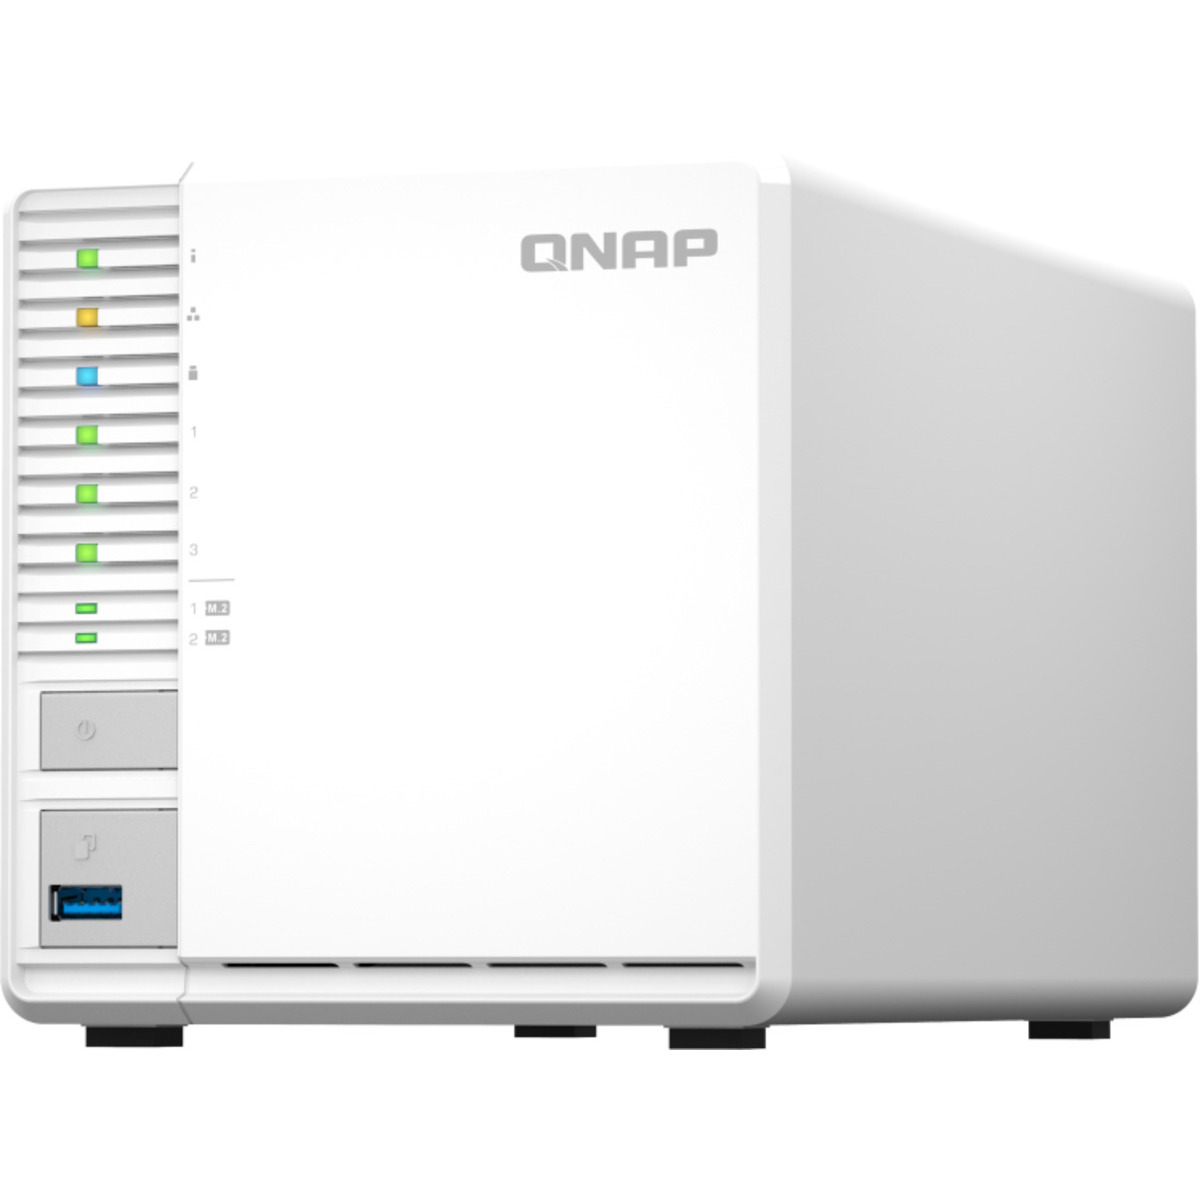 buy $2102 QNAP TS-364 60tb Desktop NAS - Network Attached Storage Device 3x20000gb Western Digital Red Pro WD201KFGX 3.5 7200rpm SATA 6Gb/s HDD NAS Class Drives Installed - Burn-In Tested - nas headquarters buy network attached storage server device das new raid-5 free shipping simply usa TS-364